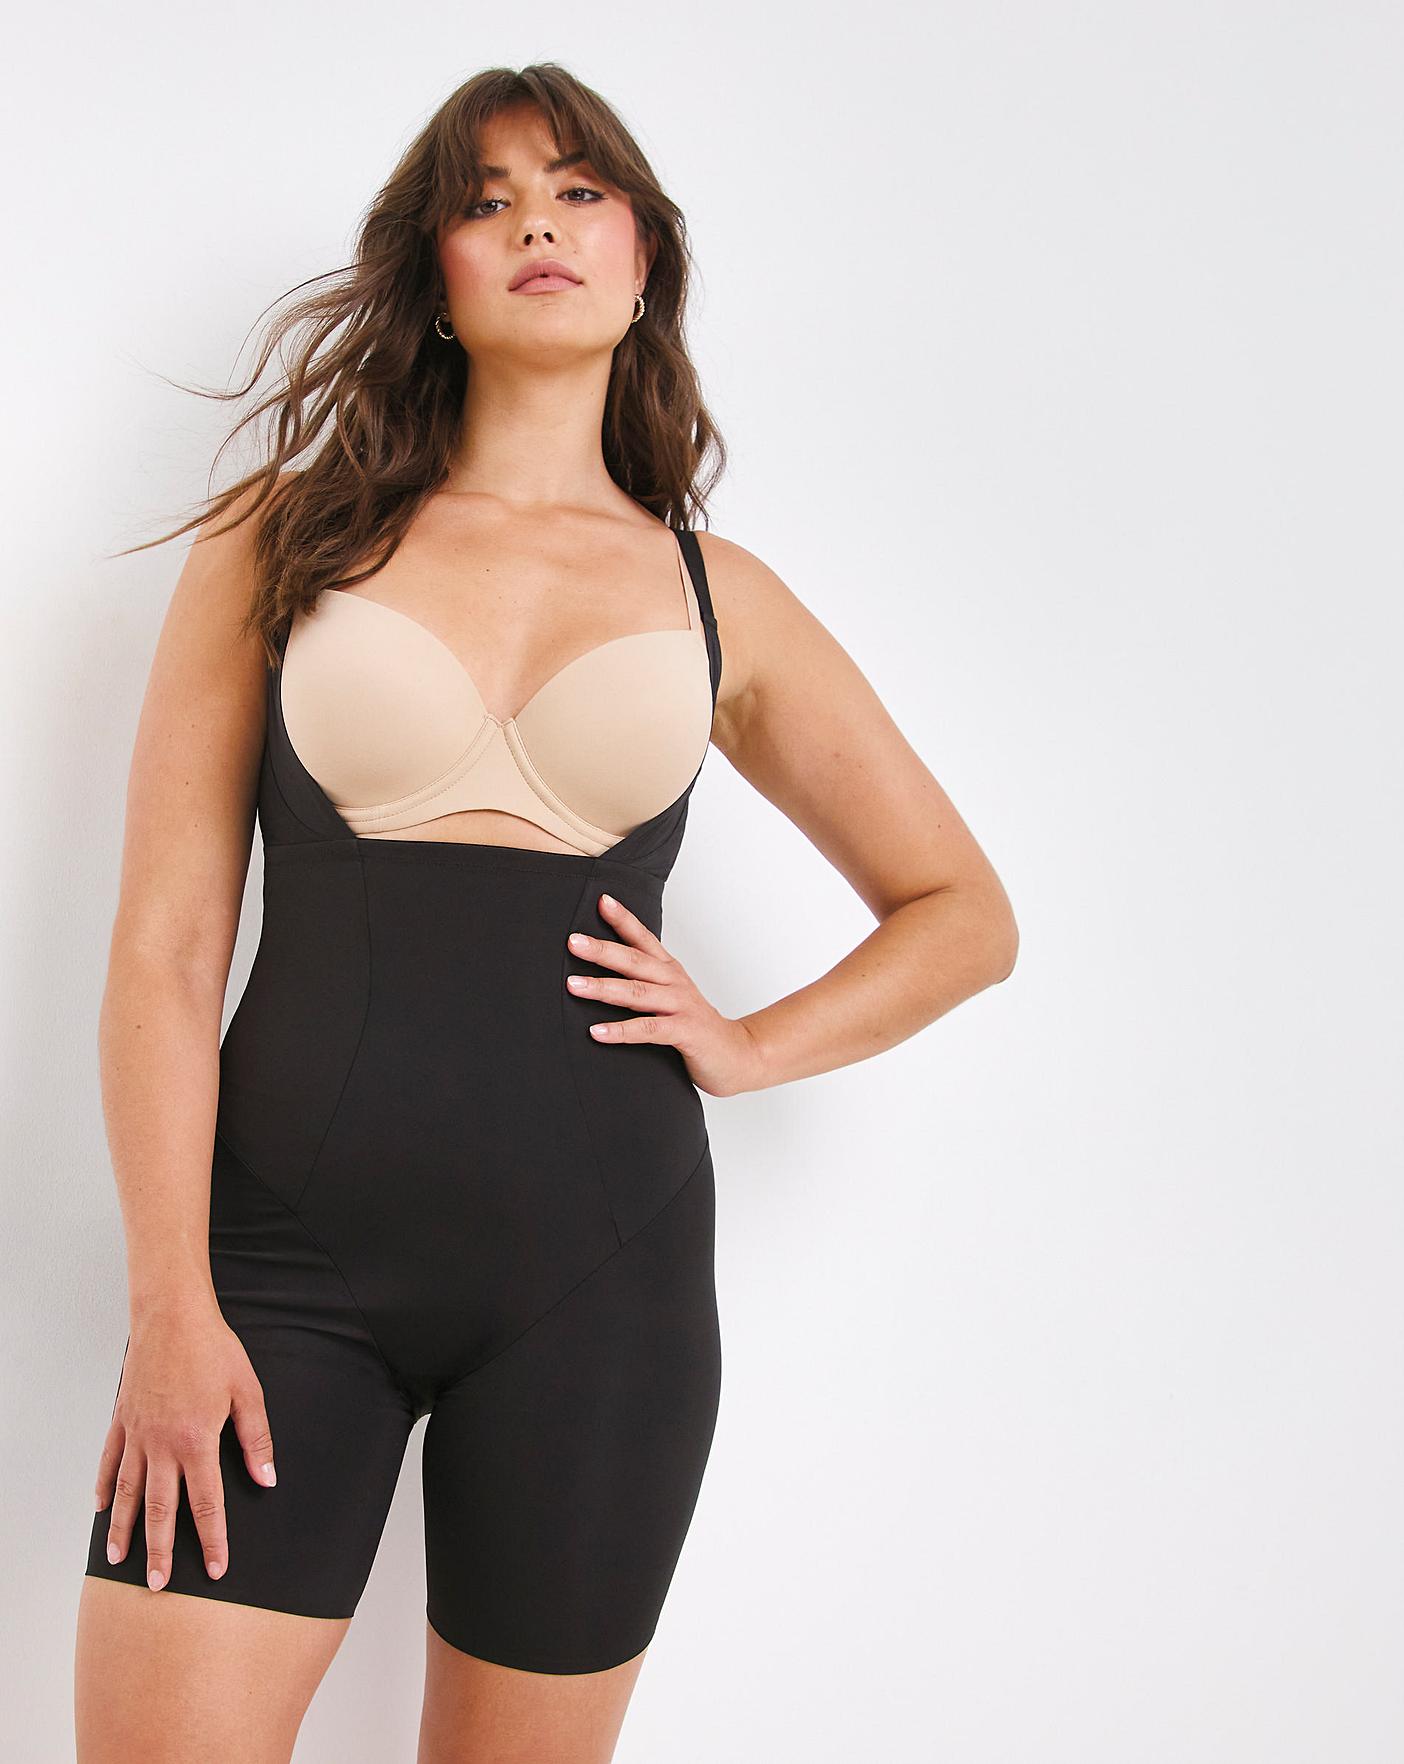 Our most selling shapewear has been restocked all sizes are